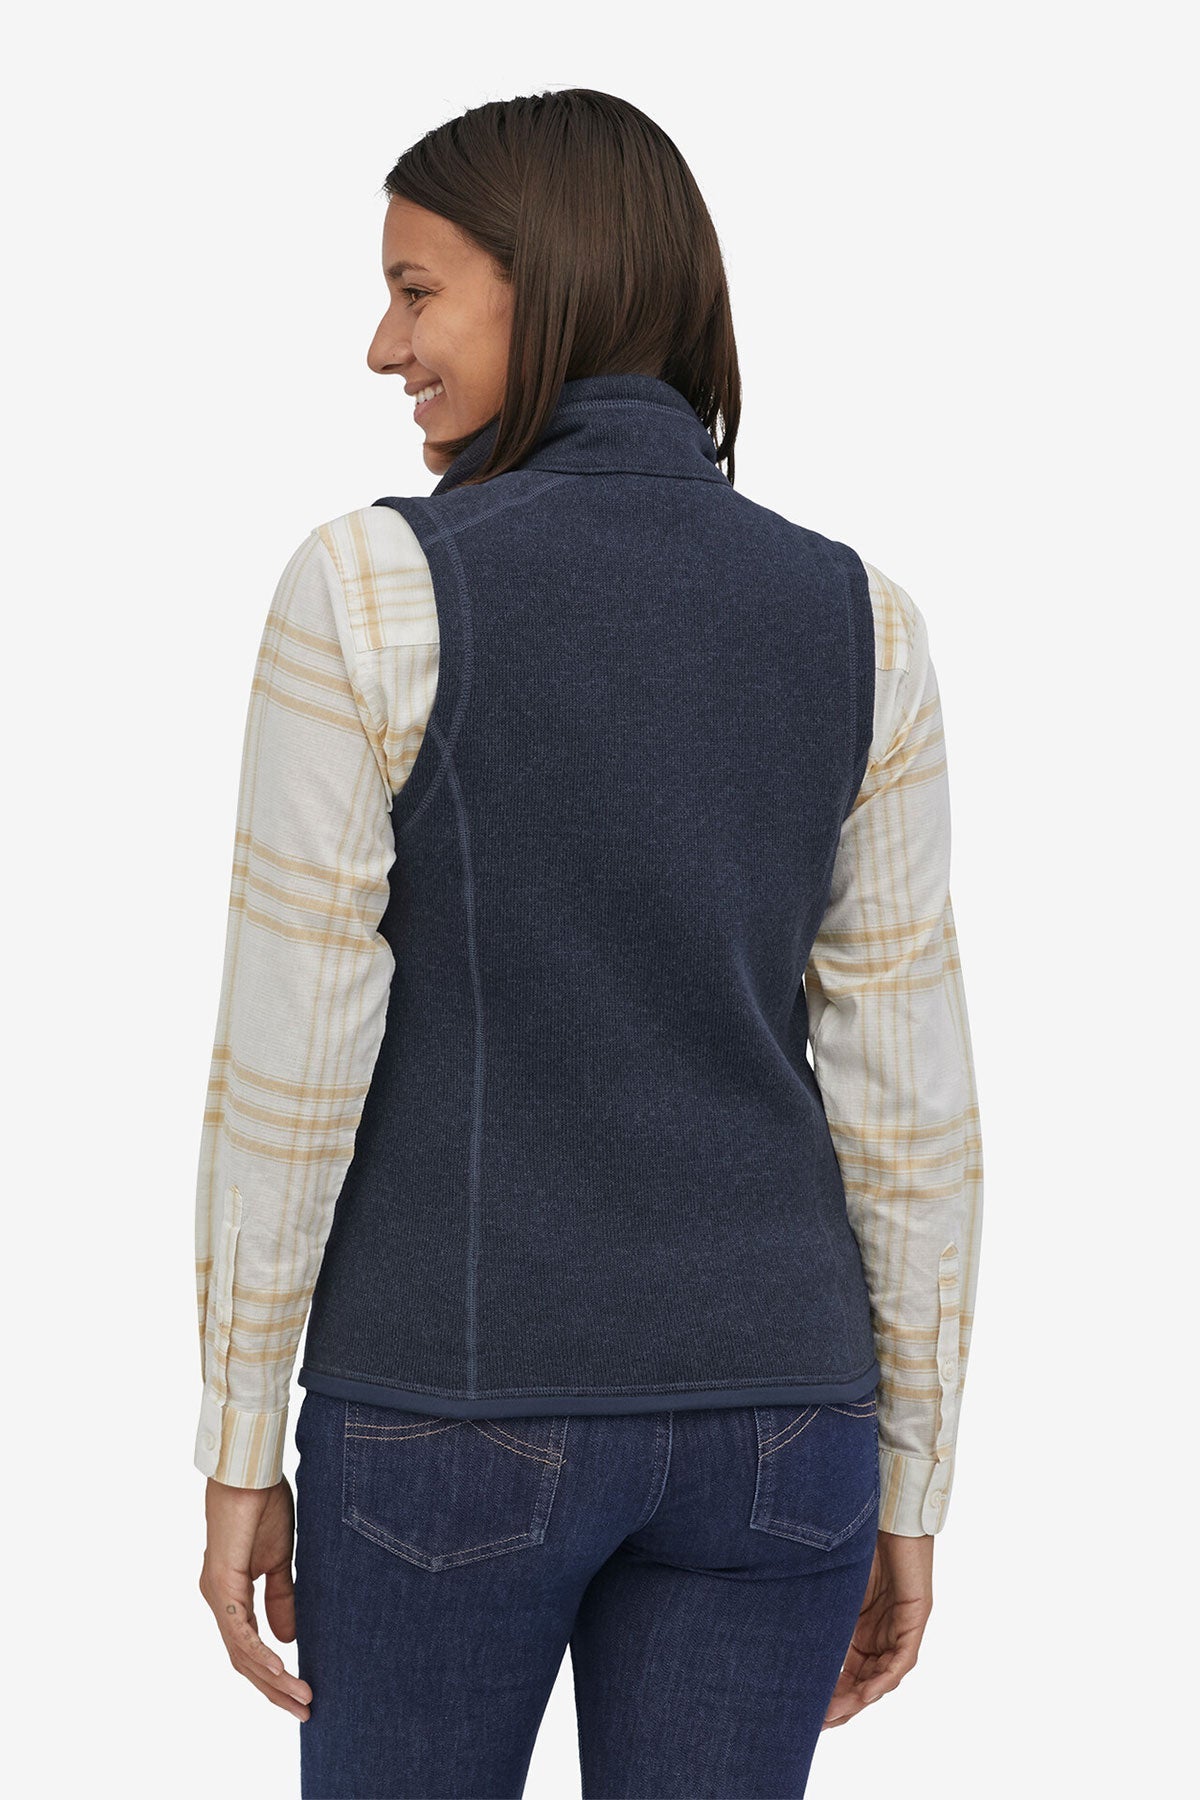 Patagonia Womens Sweater Vest, New Navy [Coinbase]